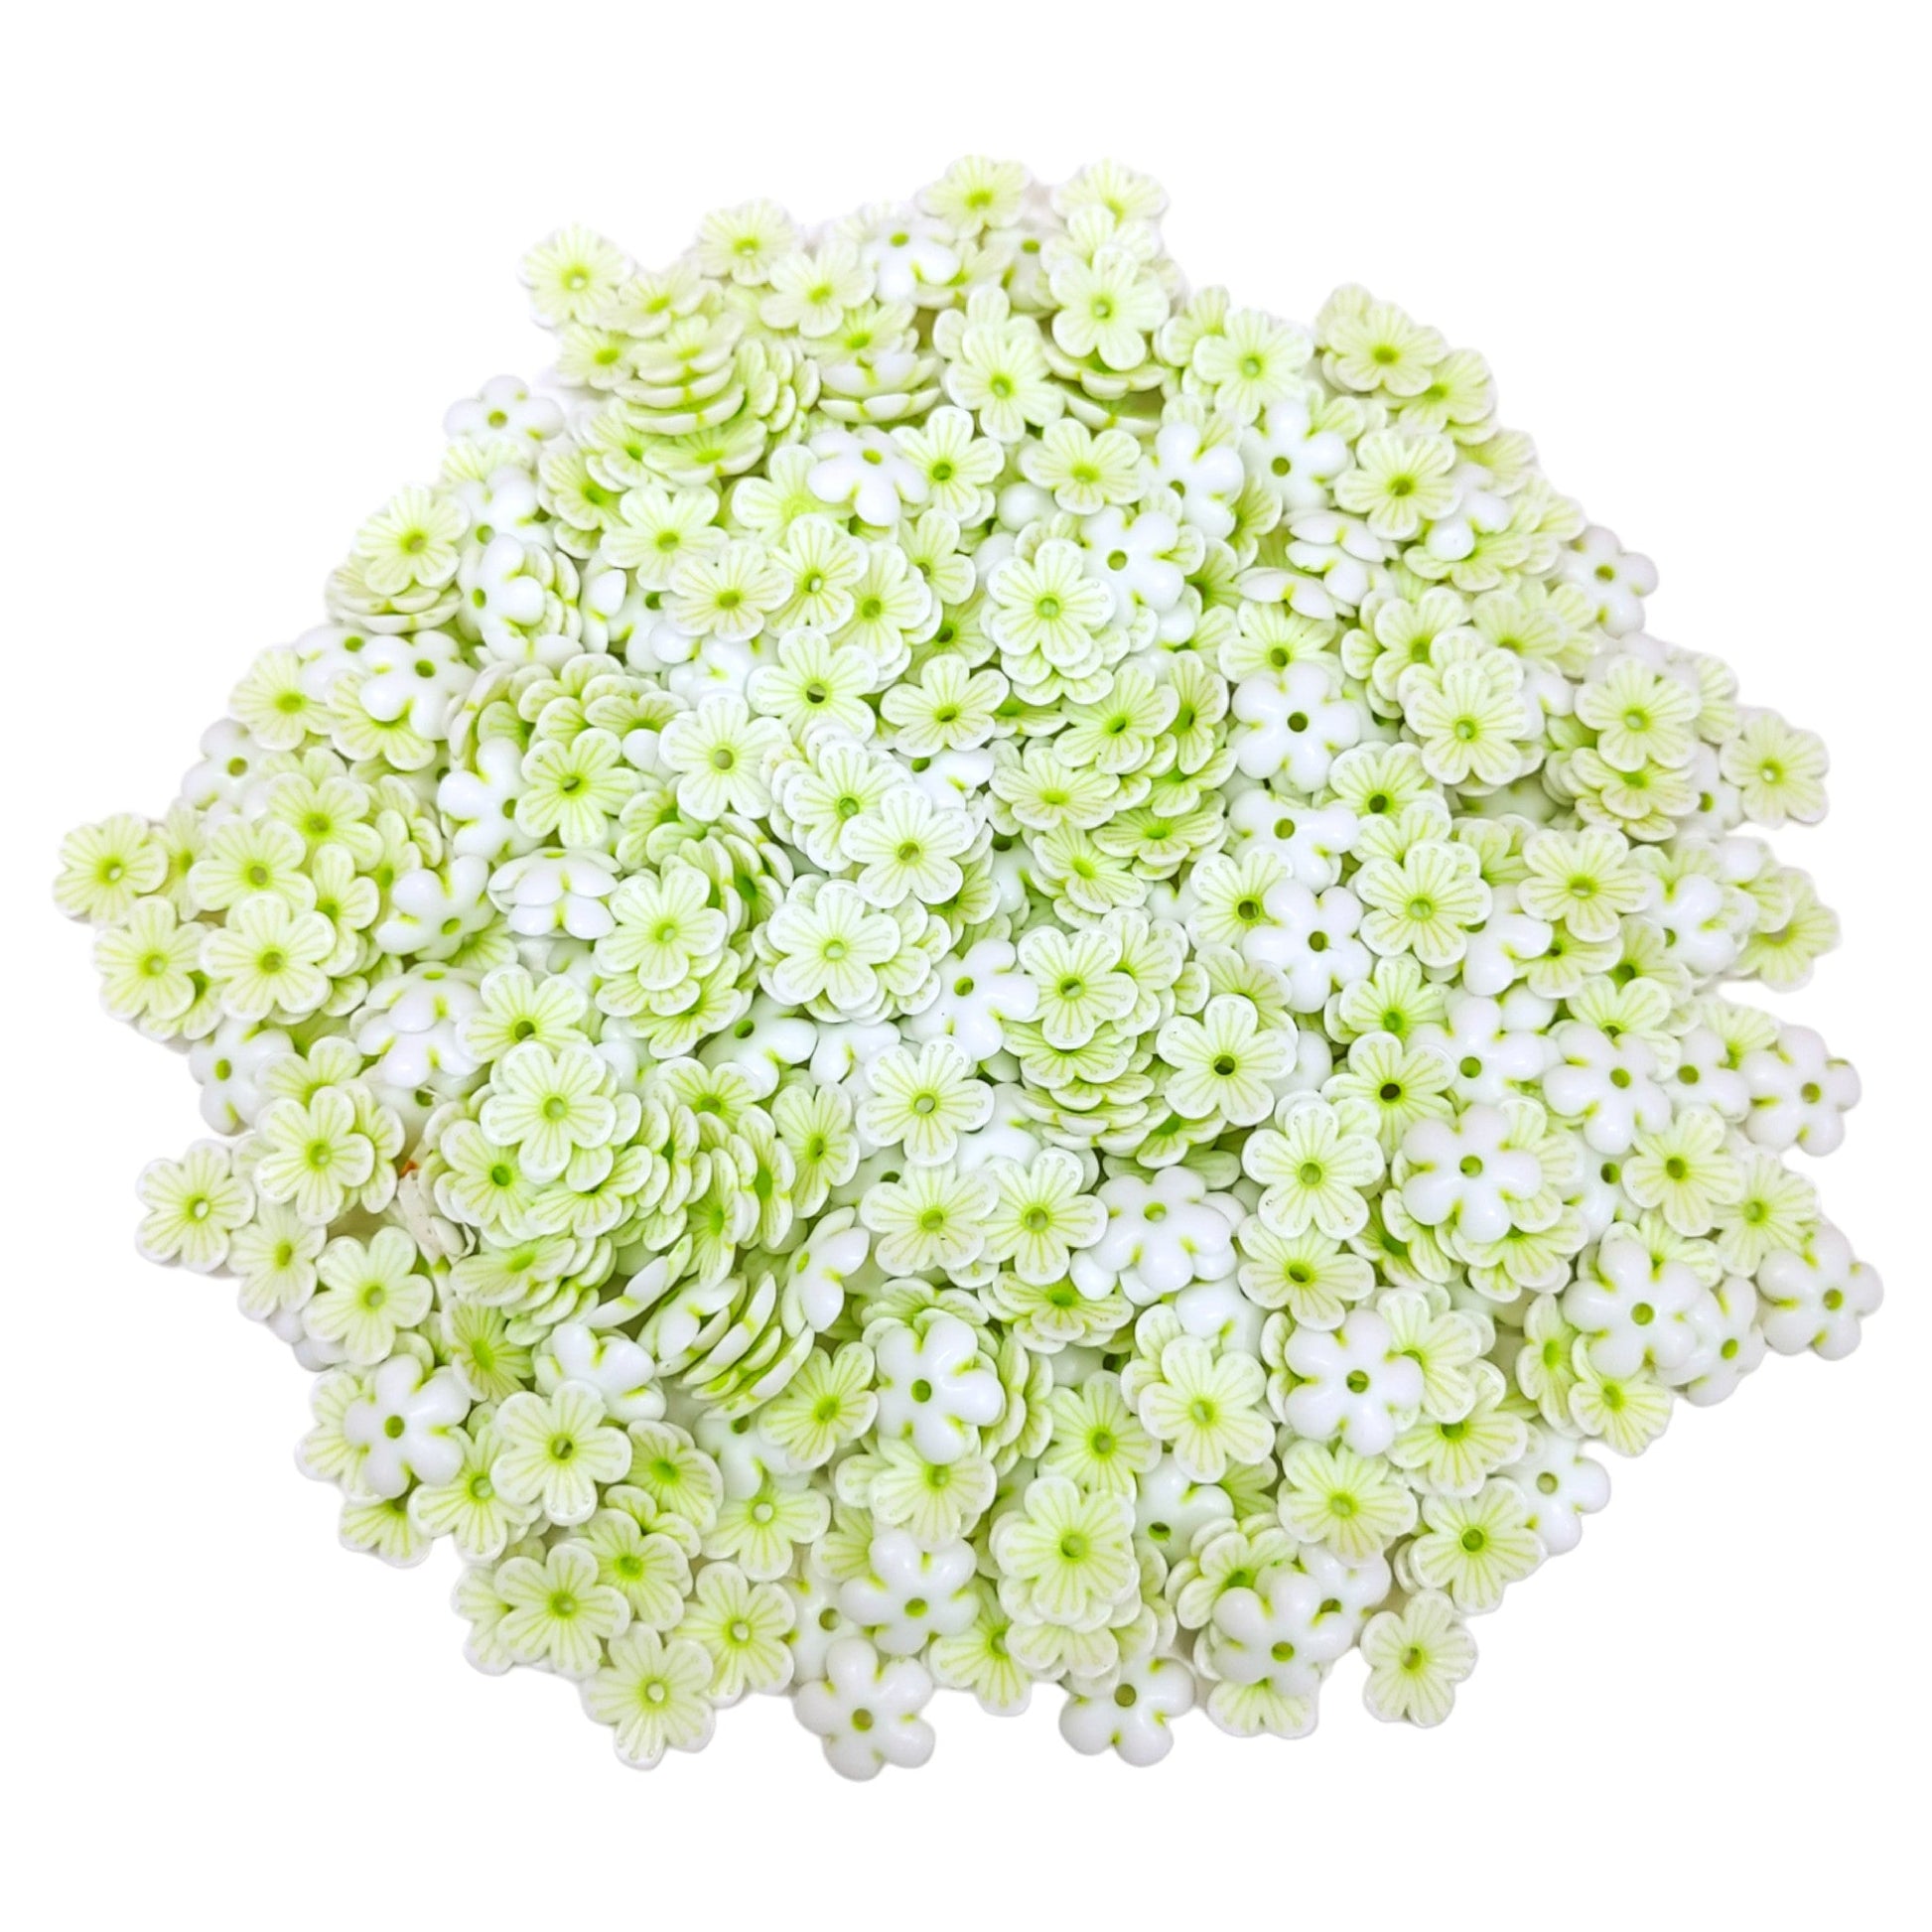 Indian Petals 12mm Small Acrylic Pastel Color Flower For Craft Or Decoration, Light green